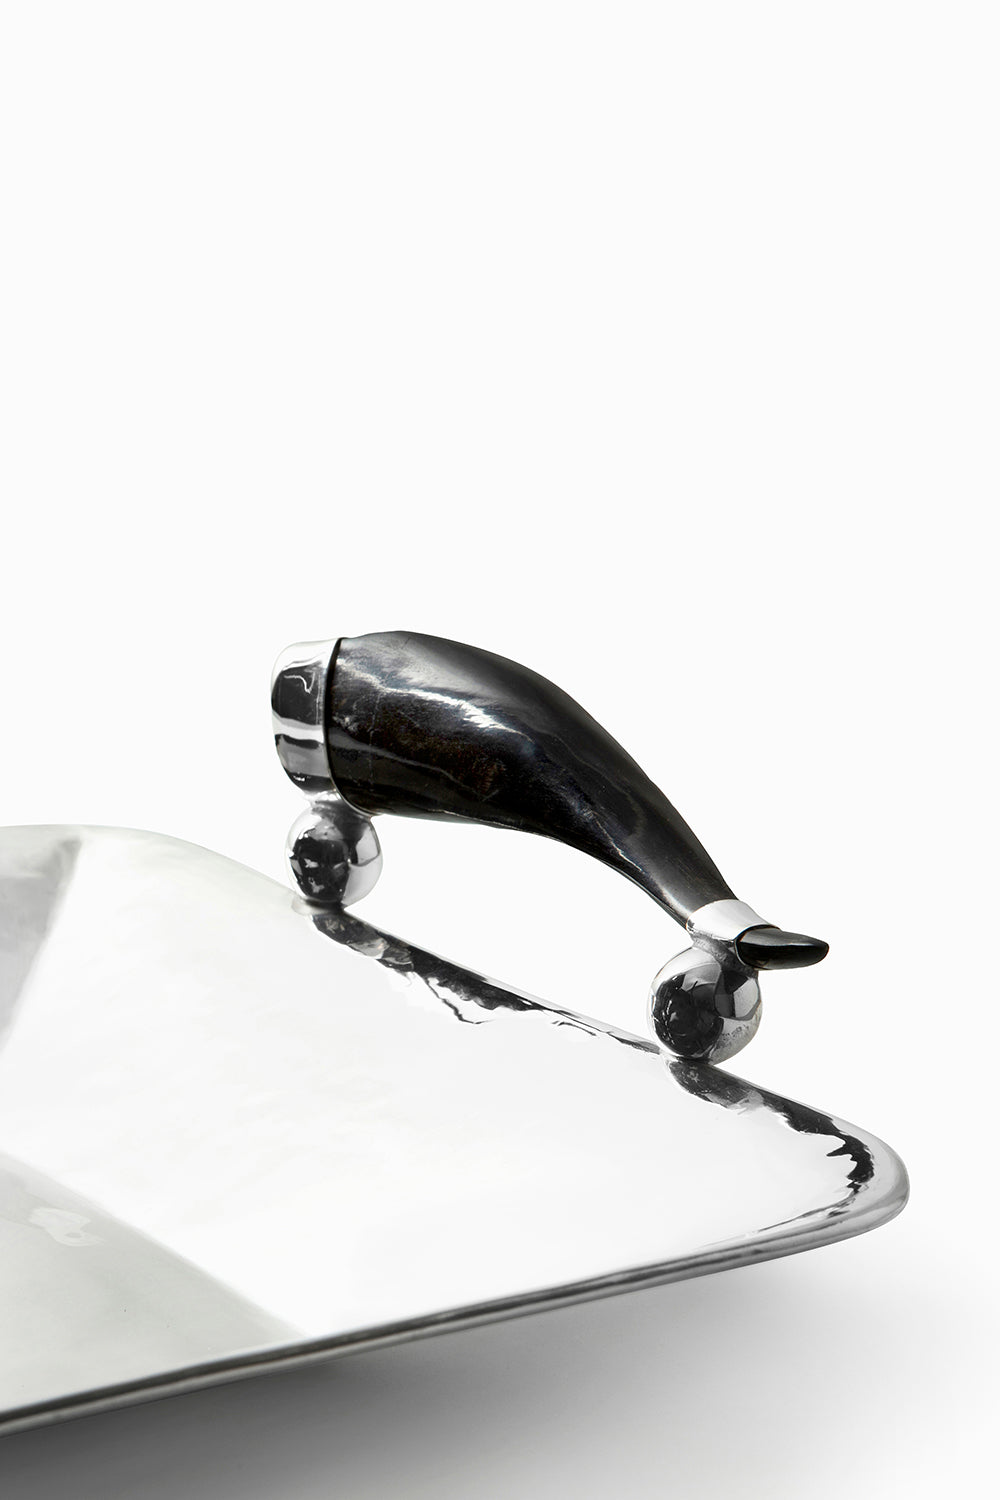 Olivos Square Tray, Black Horn, Polished Silver